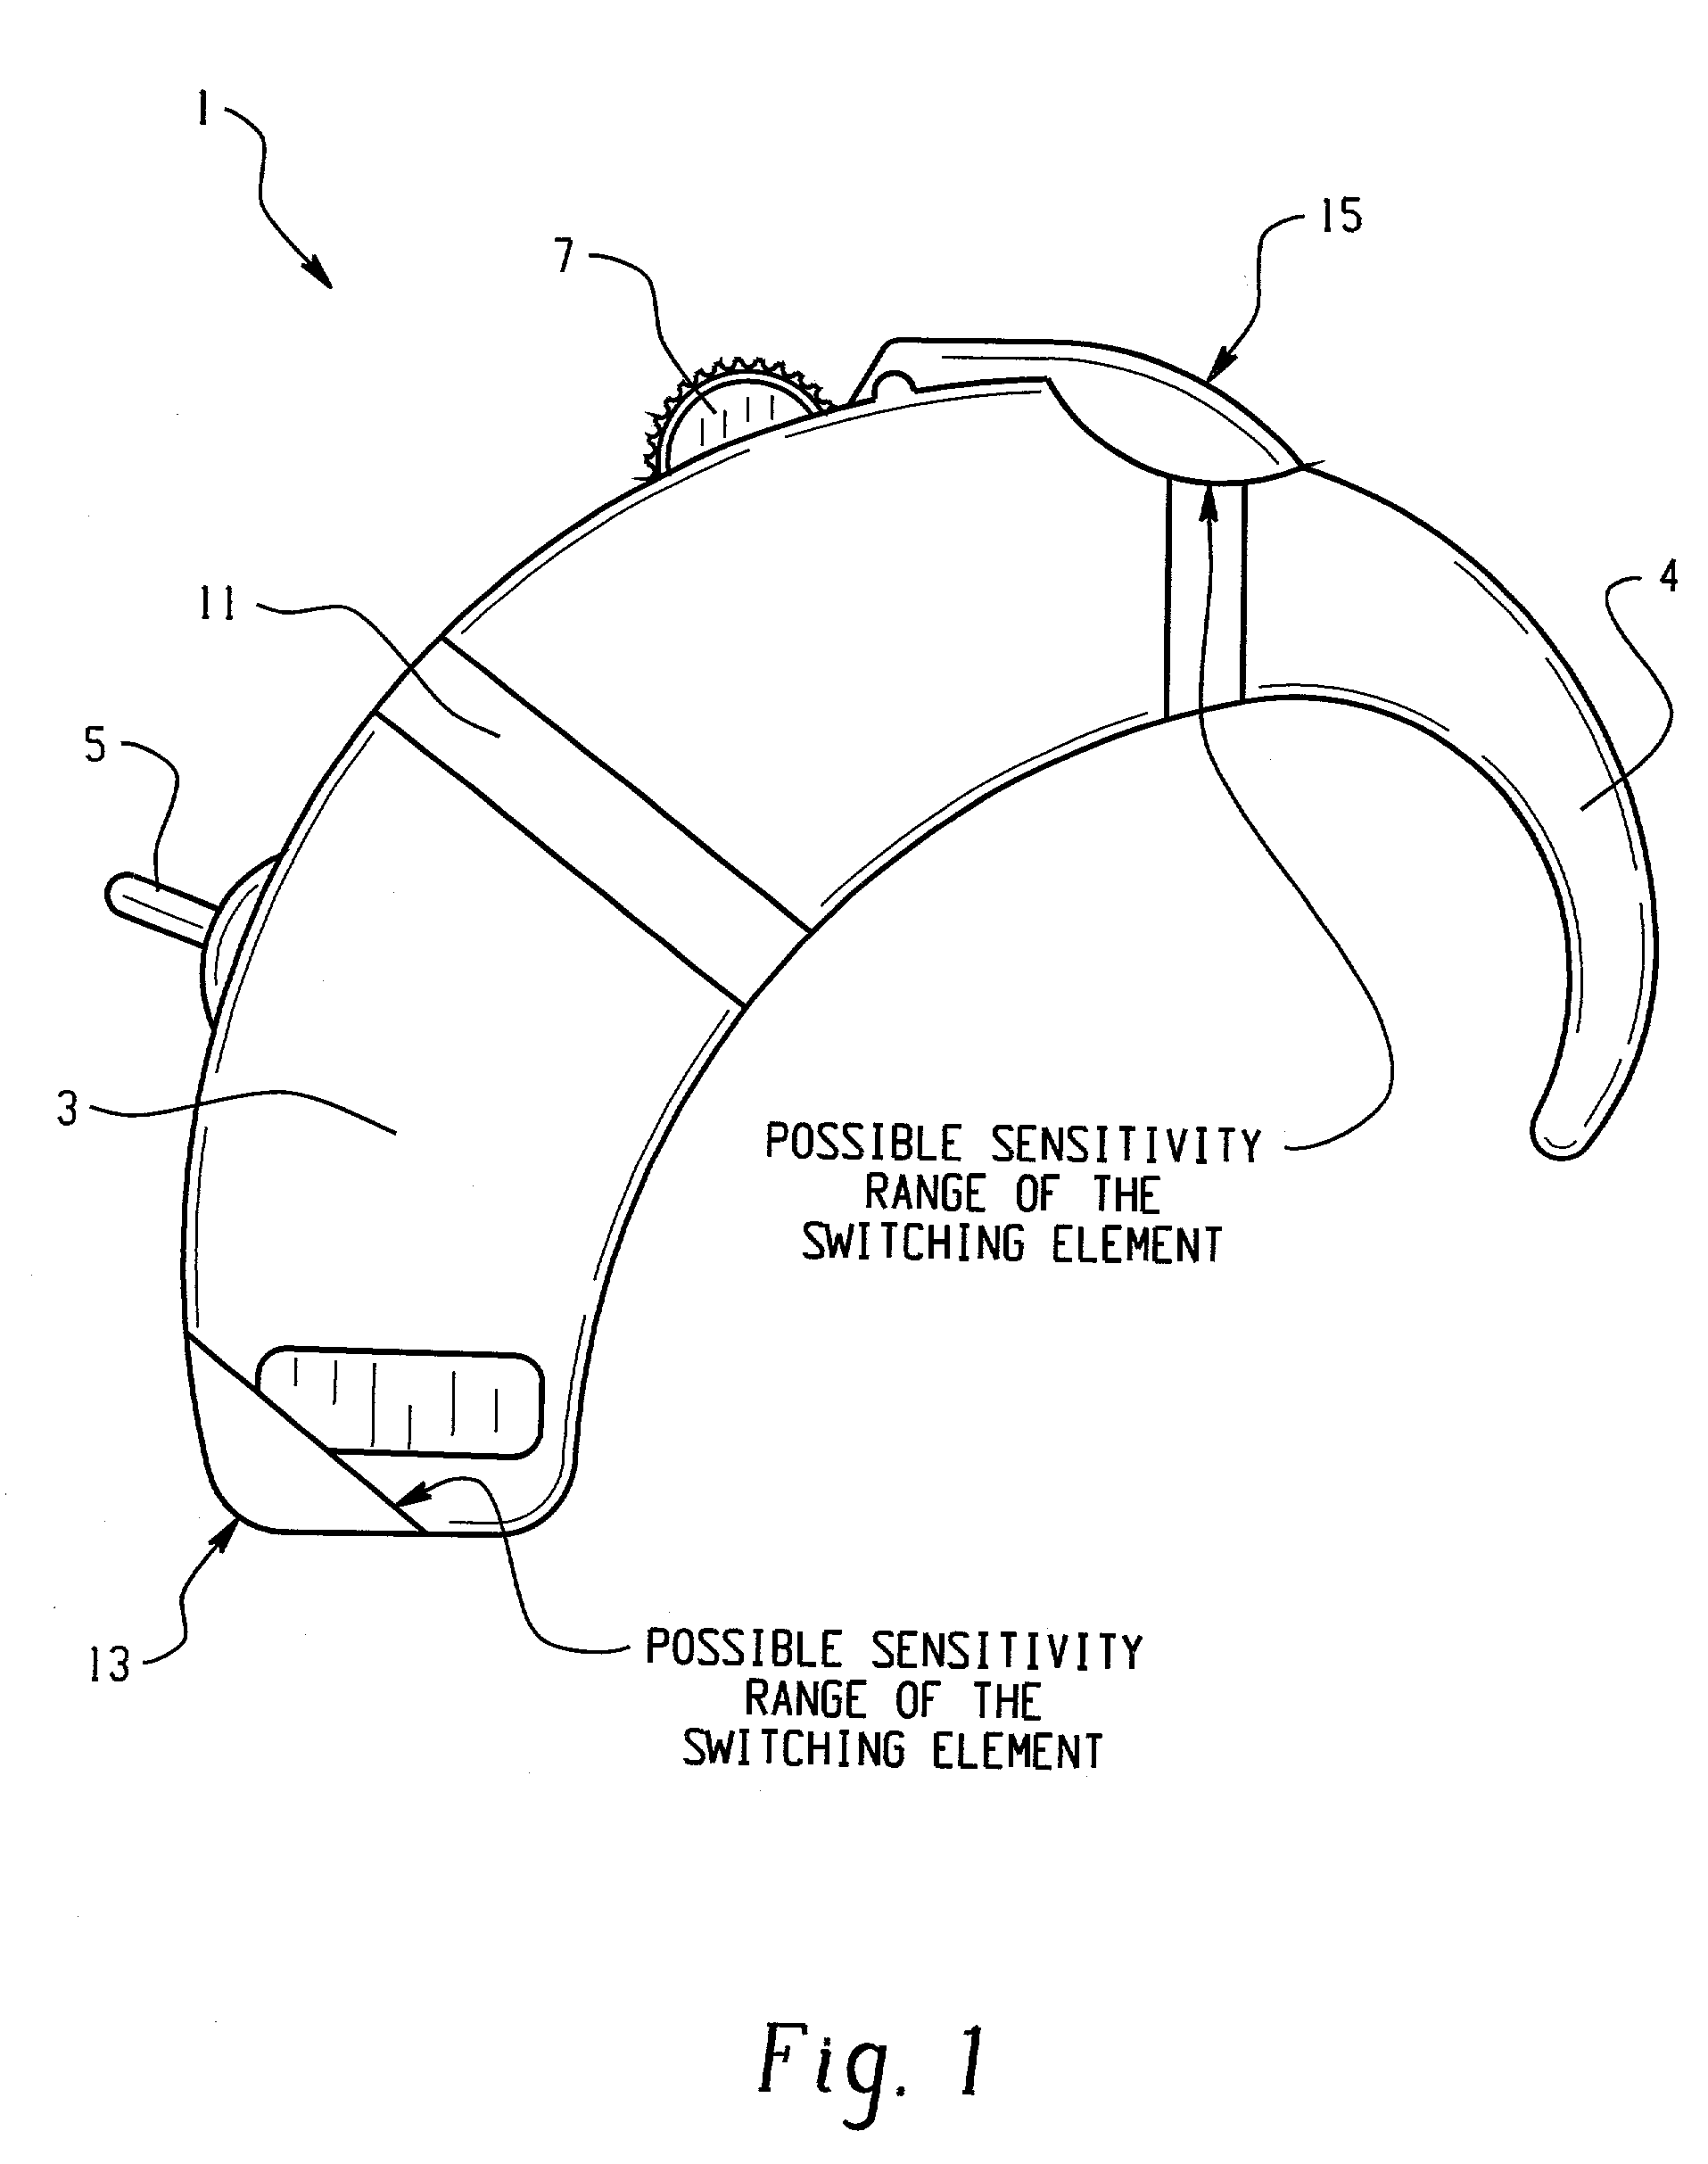 Behind-the-ear housing functioning as a switch